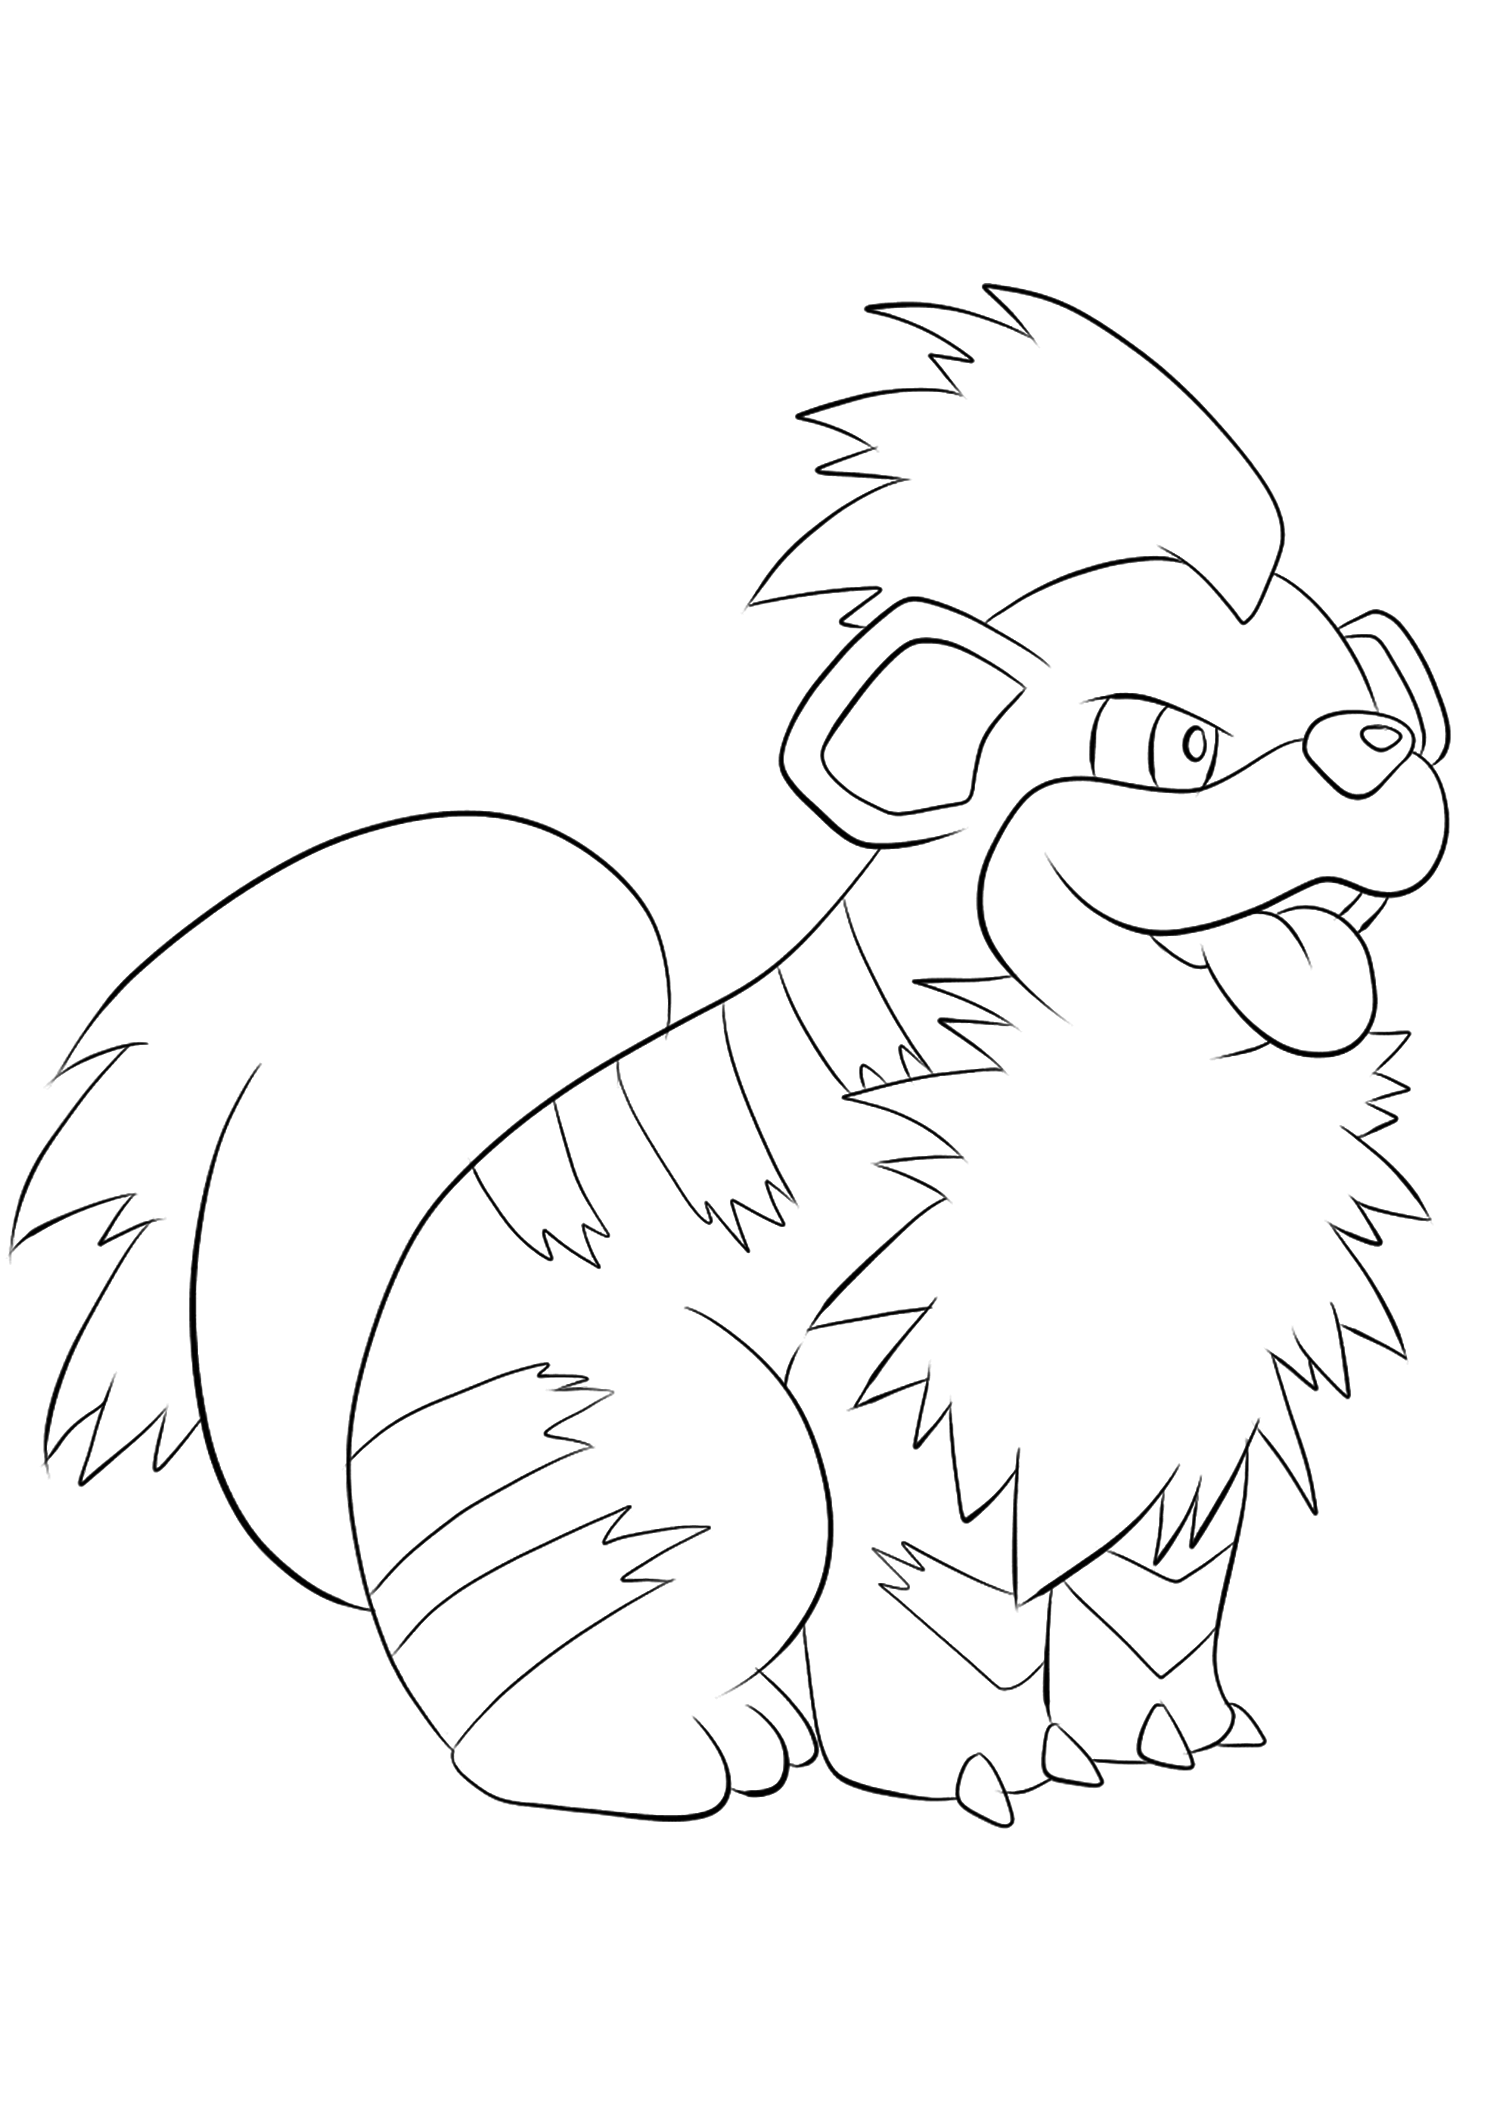 Growlithe (No.58). Growlithe Coloring page, Generation I Pokemon of type FireOriginal image credit: Pokemon linearts by Lilly Gerbil on Deviantart.Permission:  All rights reserved © Pokemon company and Ken Sugimori.